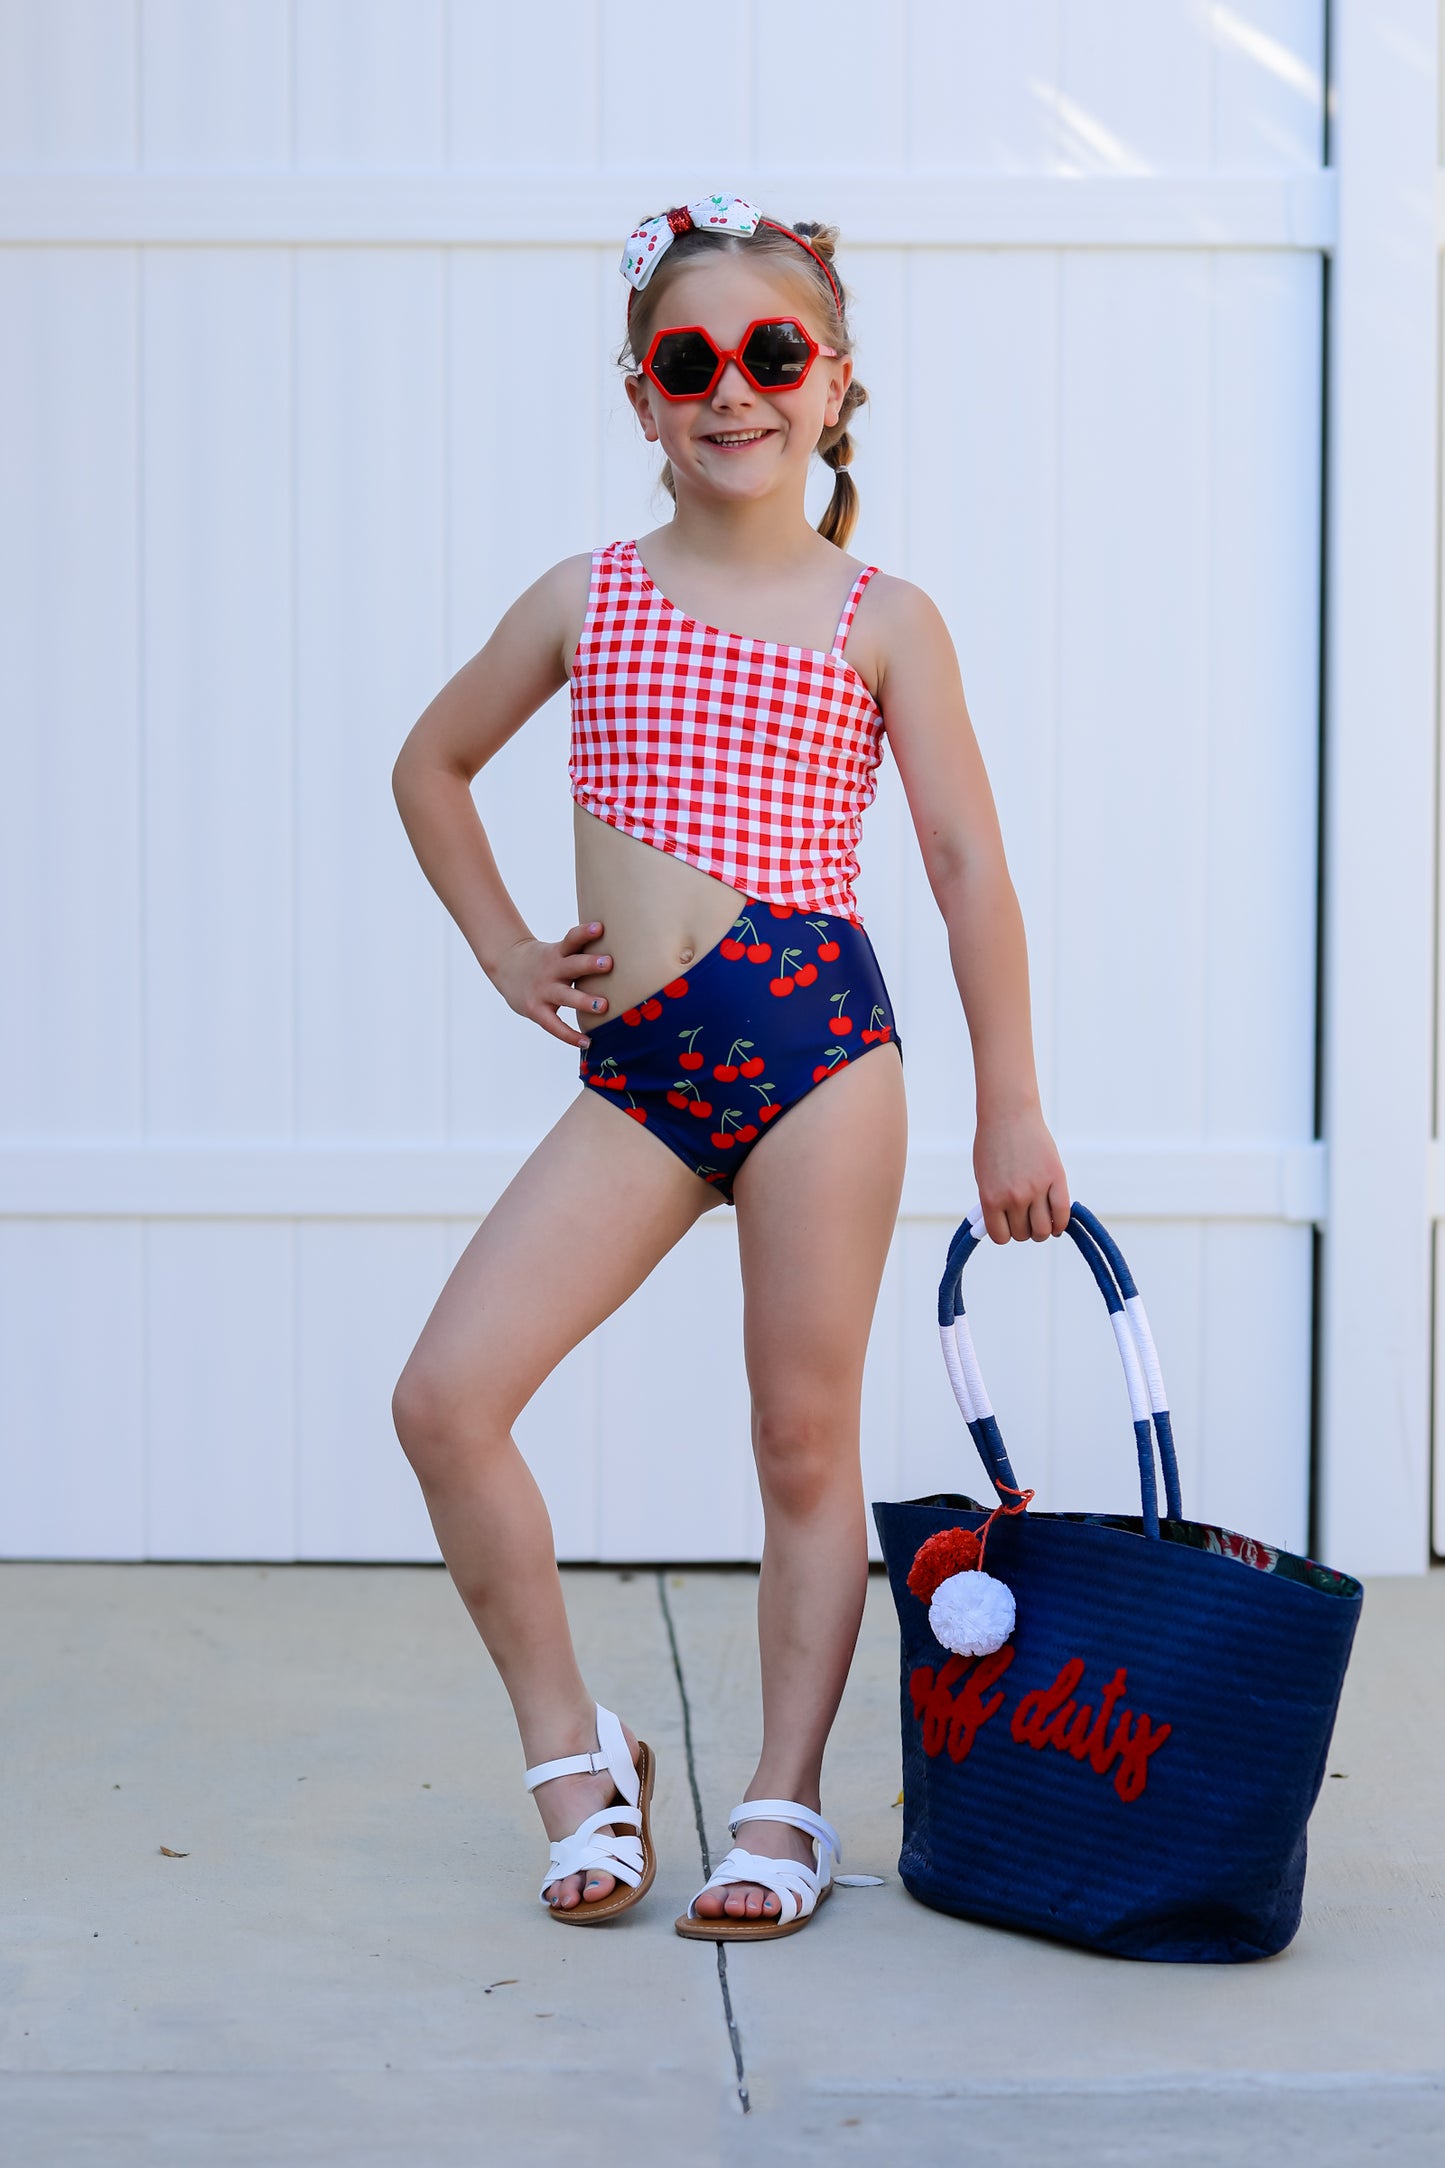 Cutout One Piece - Red Gingham and Cherry